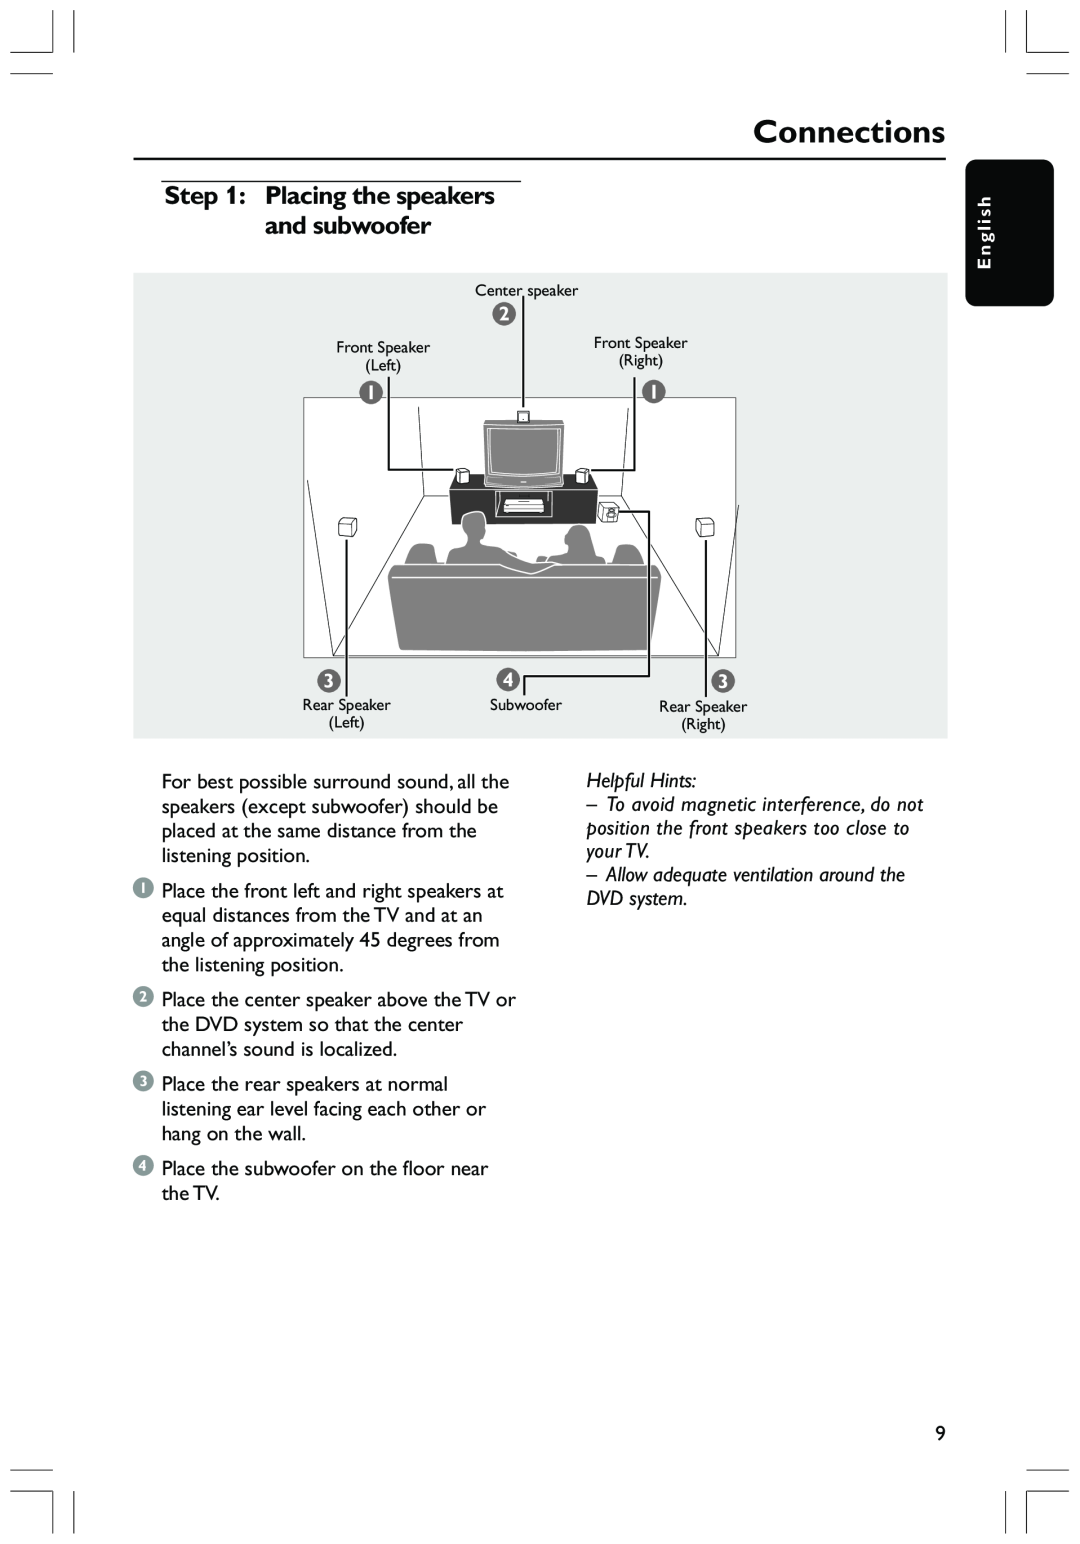 Philips HTS3410D user manual Connections, Placing the speakers and subwoofer, Helpful Hints 